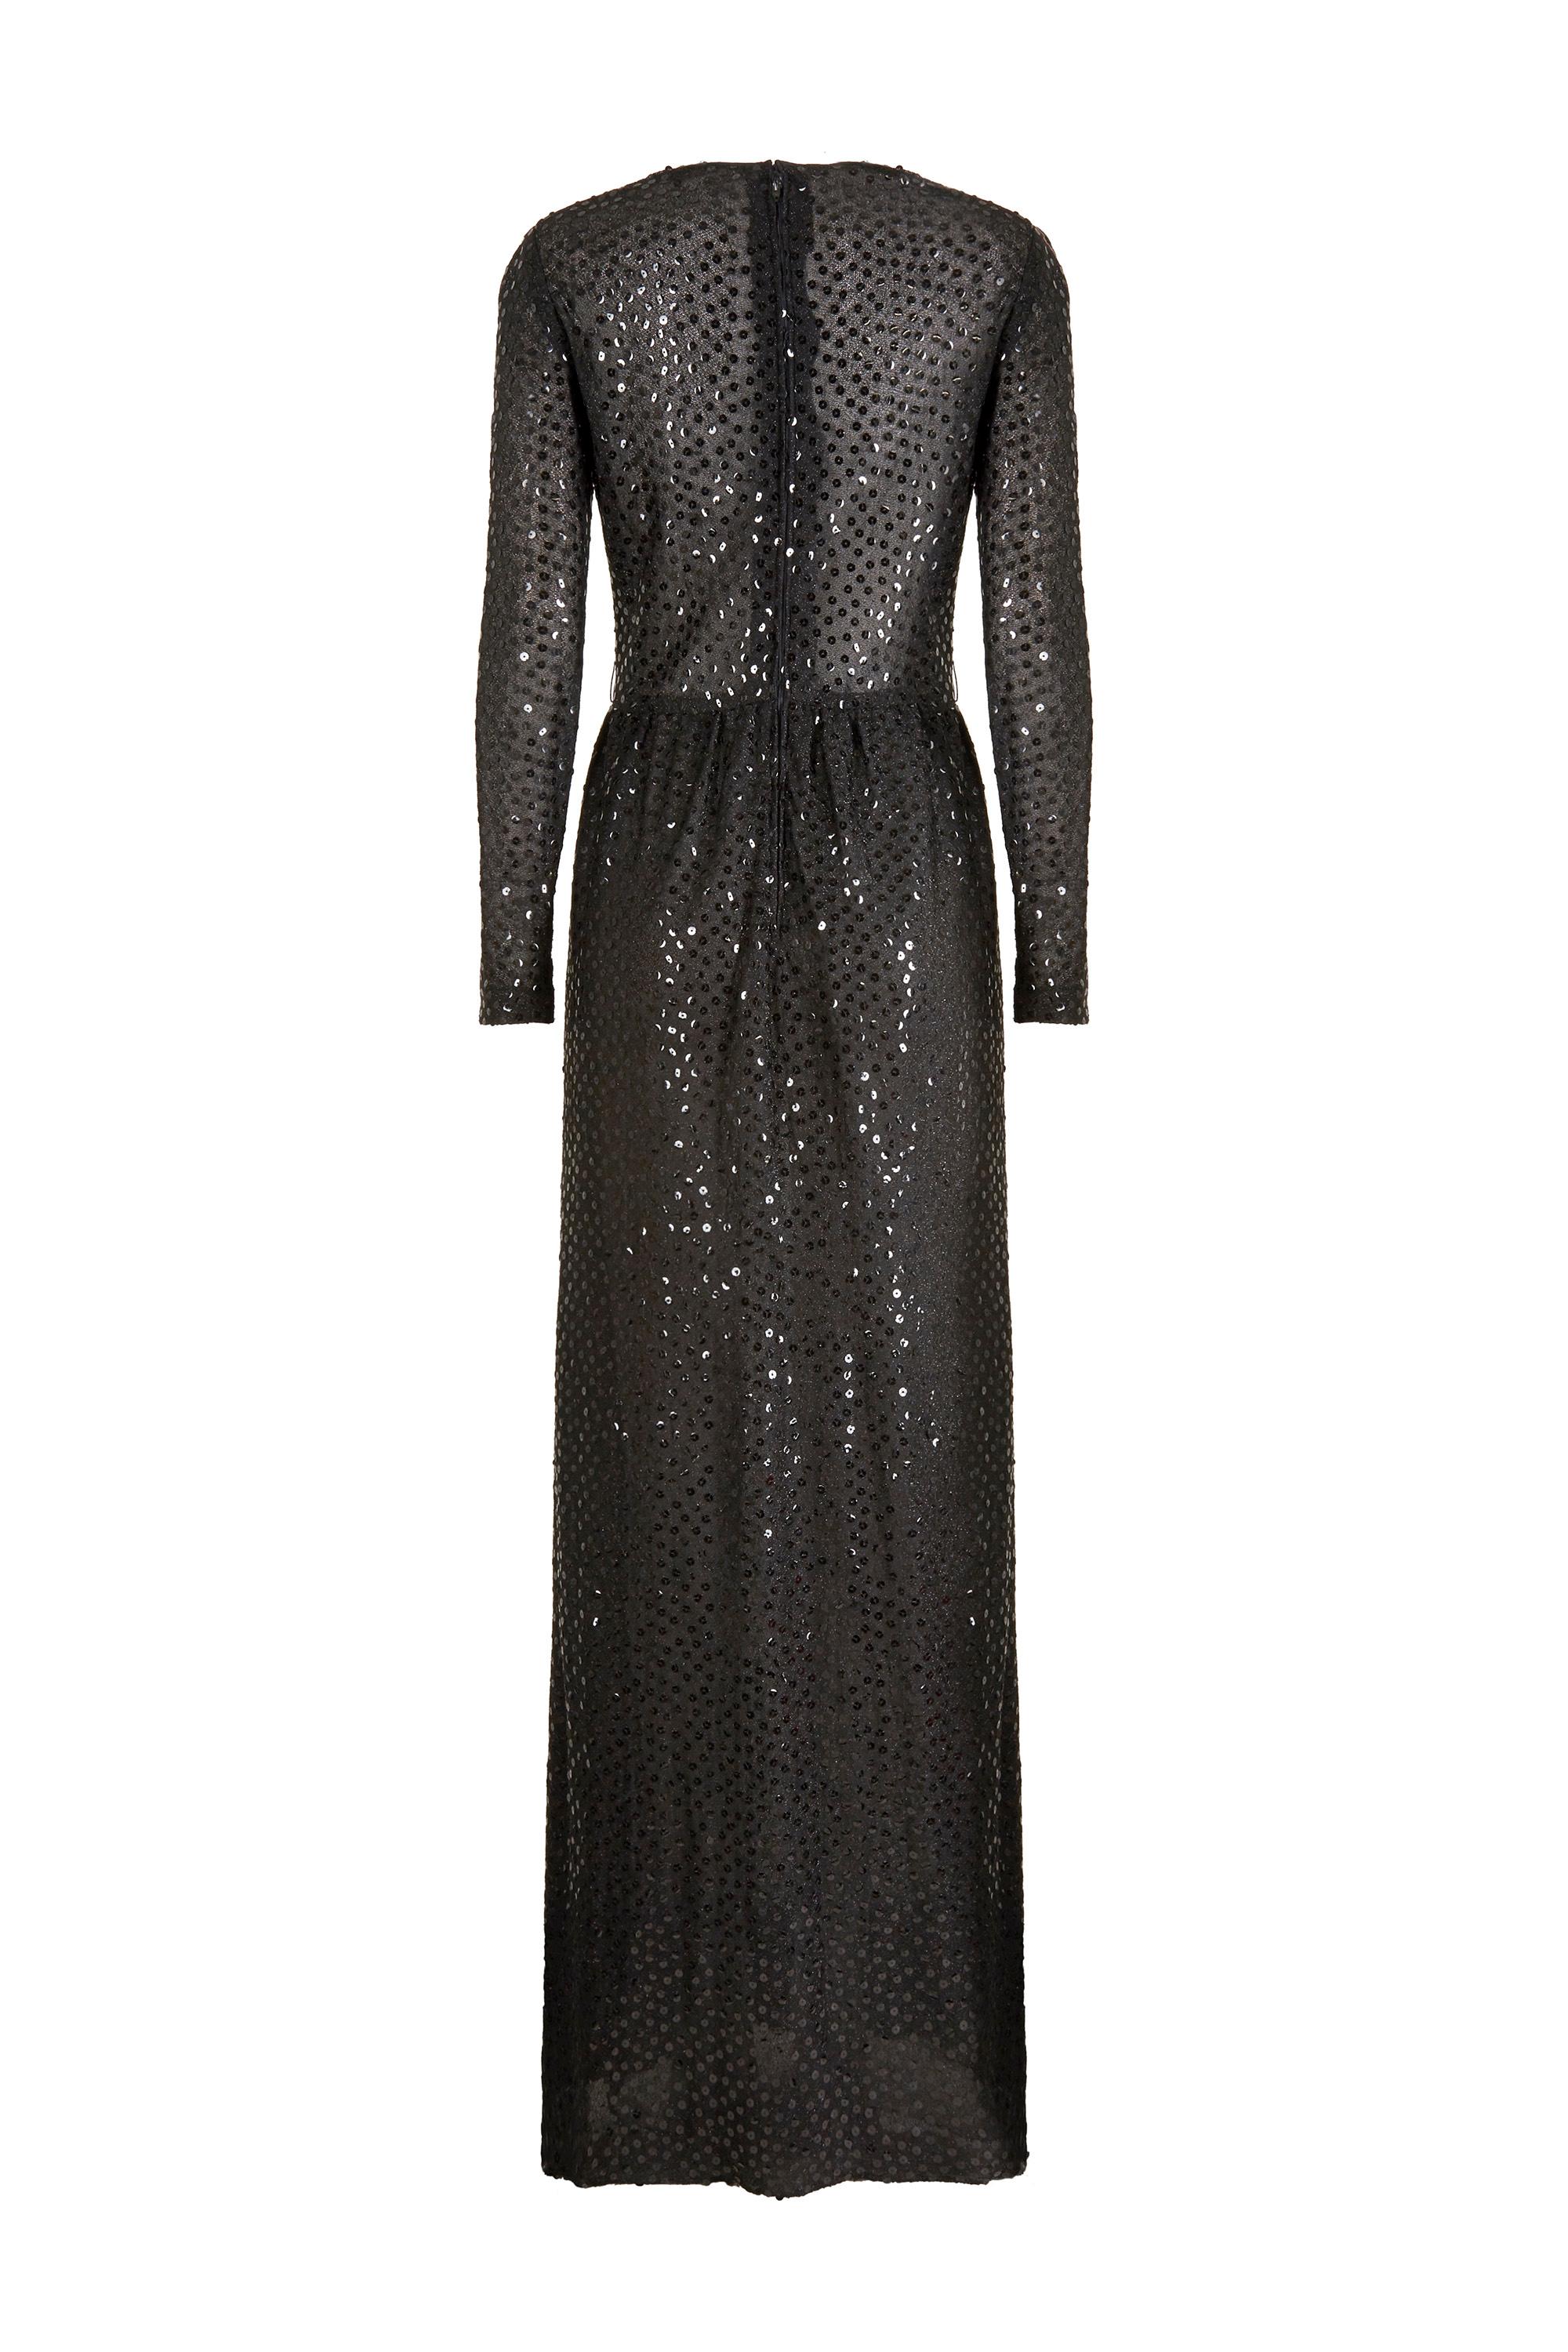 1970s Morty Sussman For Mollie Parnis Black Sequinned Dress In Excellent Condition For Sale In London, GB